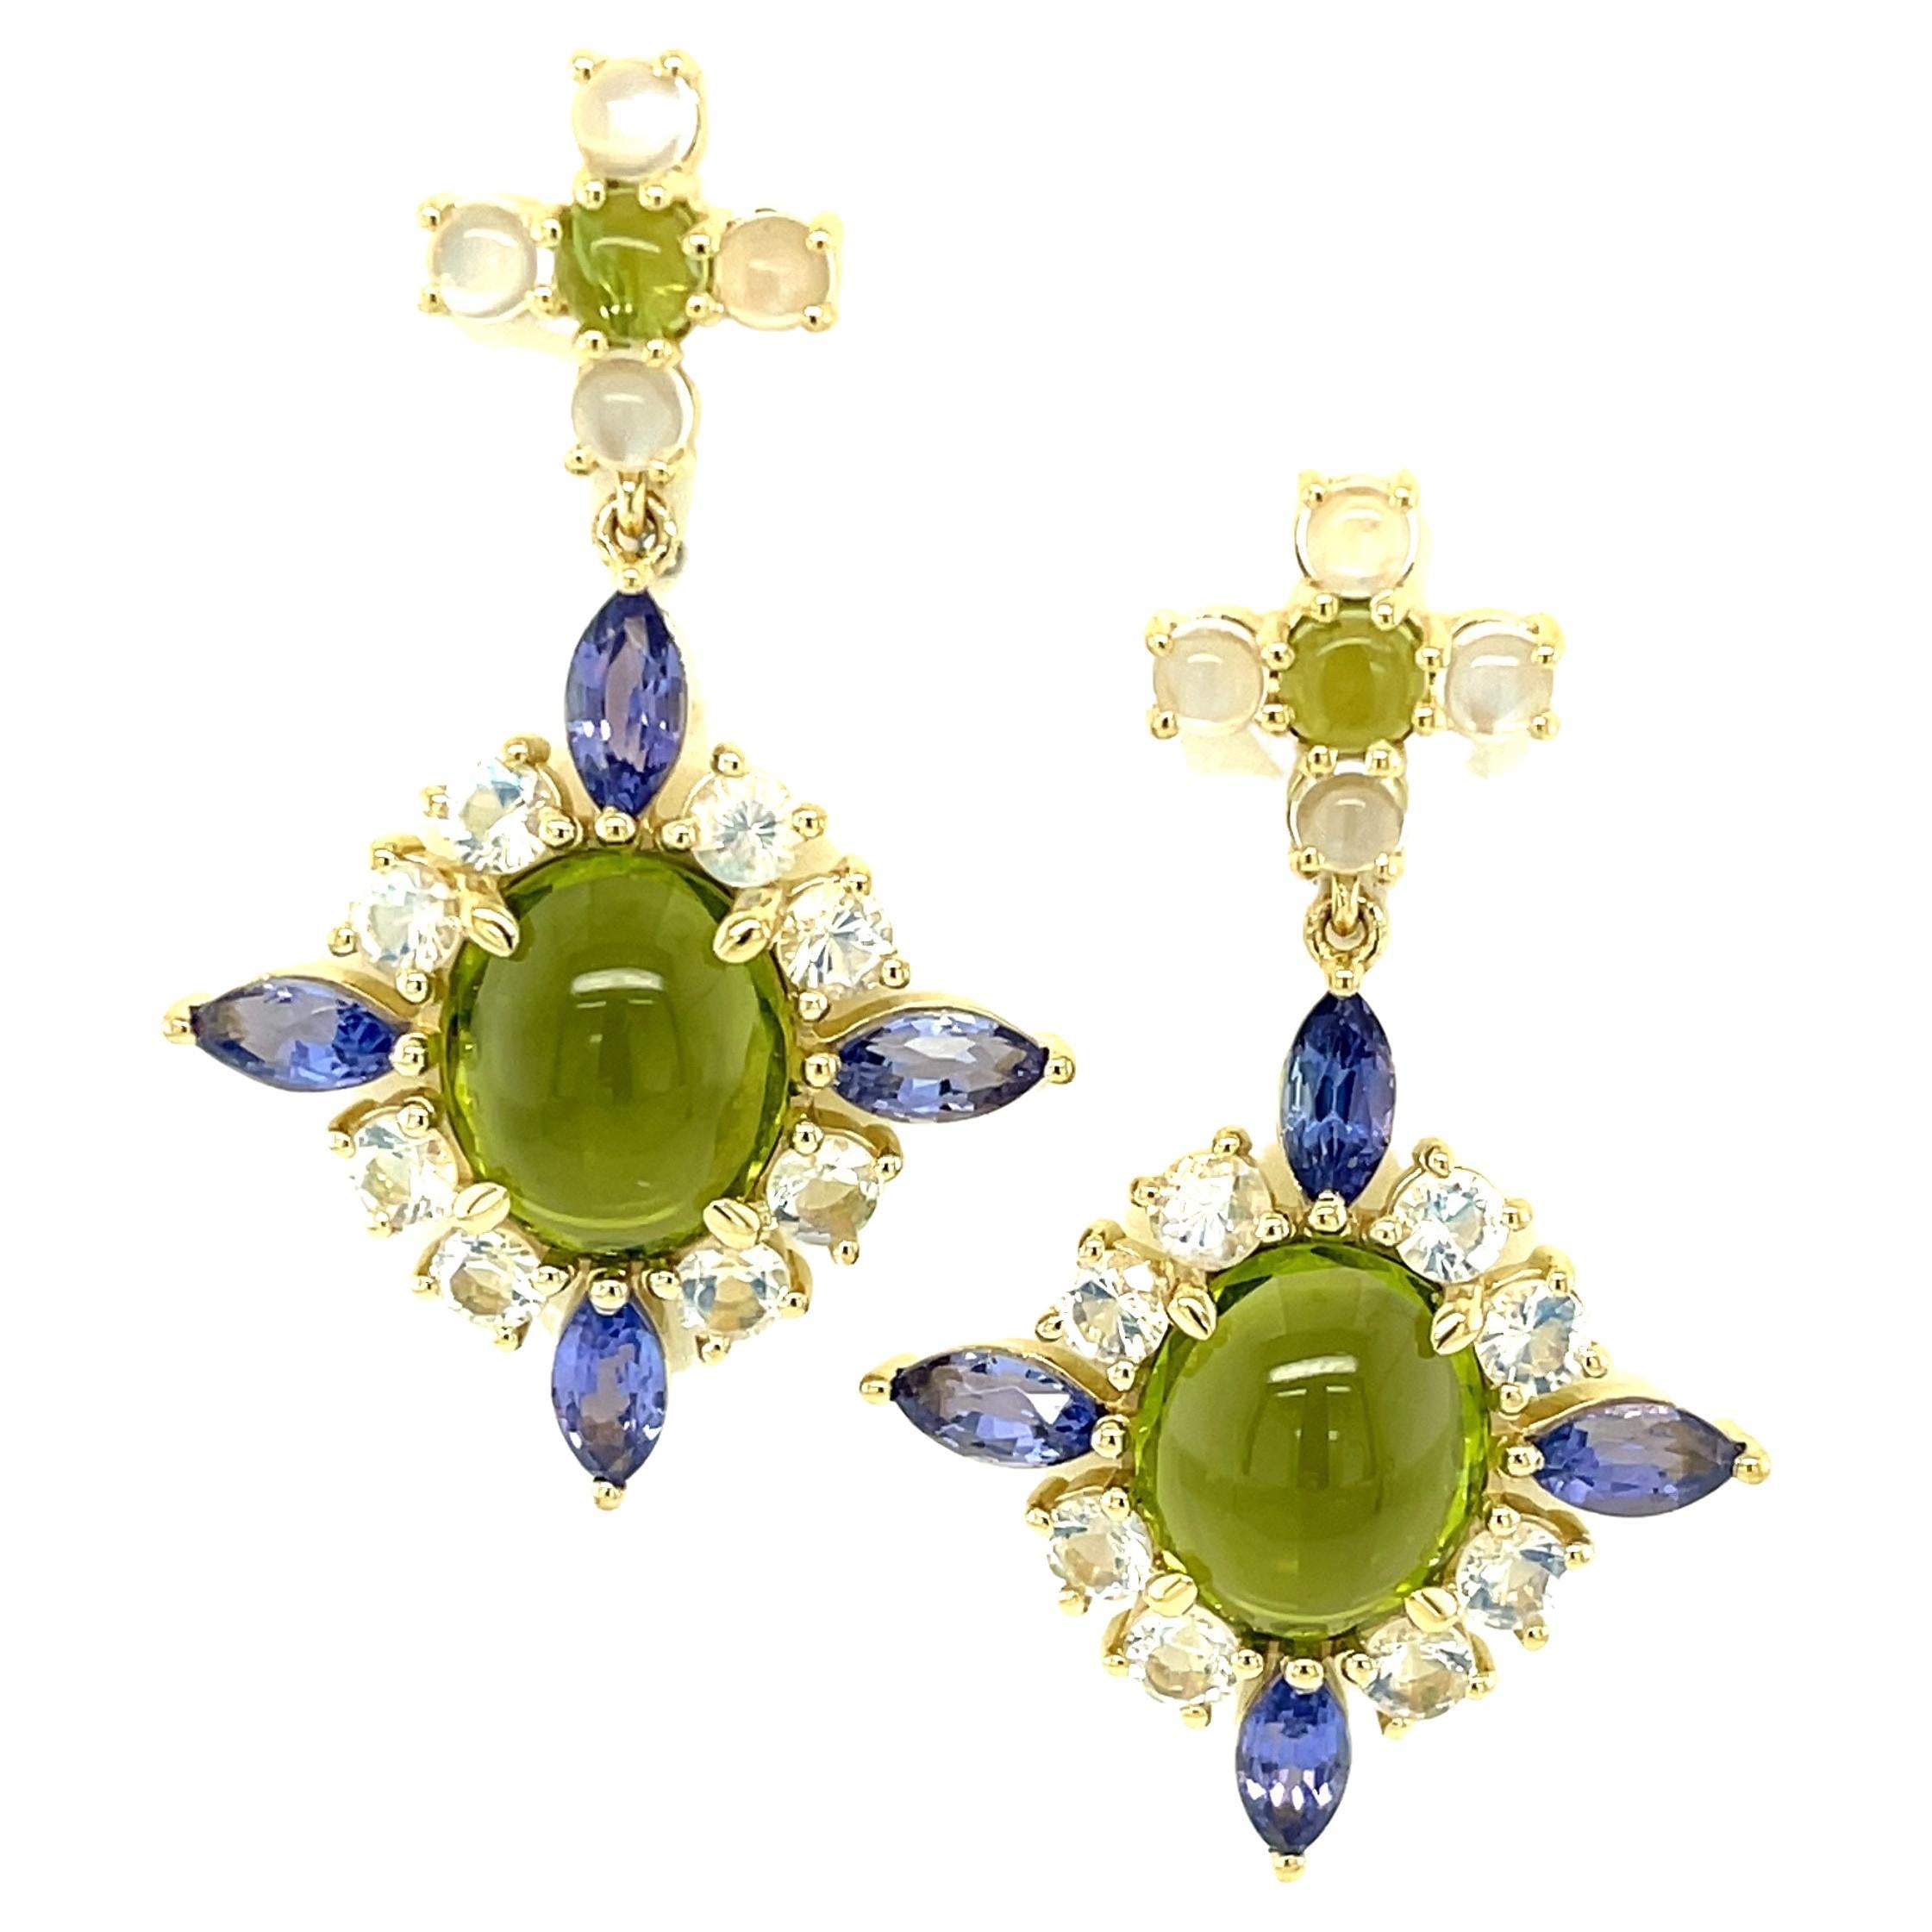 These regal earrings featuring peridots, moonstones and tanzanites are a gemstone lover's dream! Luscious green peridot cacochons are paired with blue flash moonstones and sparkling marquise-cut tanzanite in a beautiful arrangement of colors and